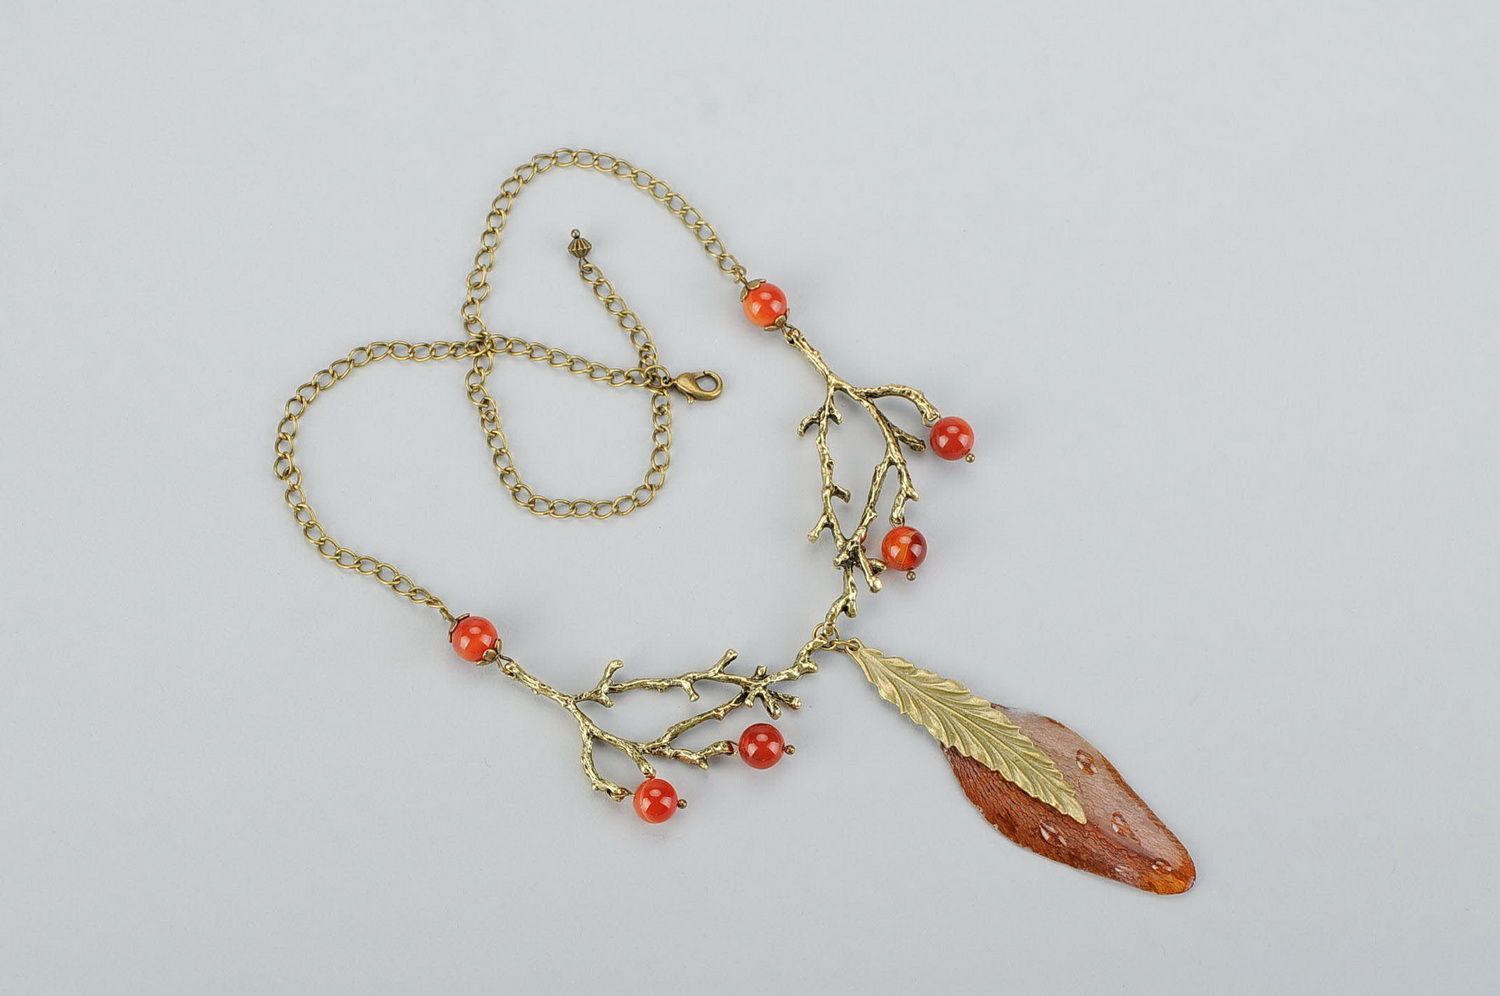 Necklace made of lily petals and agate photo 1